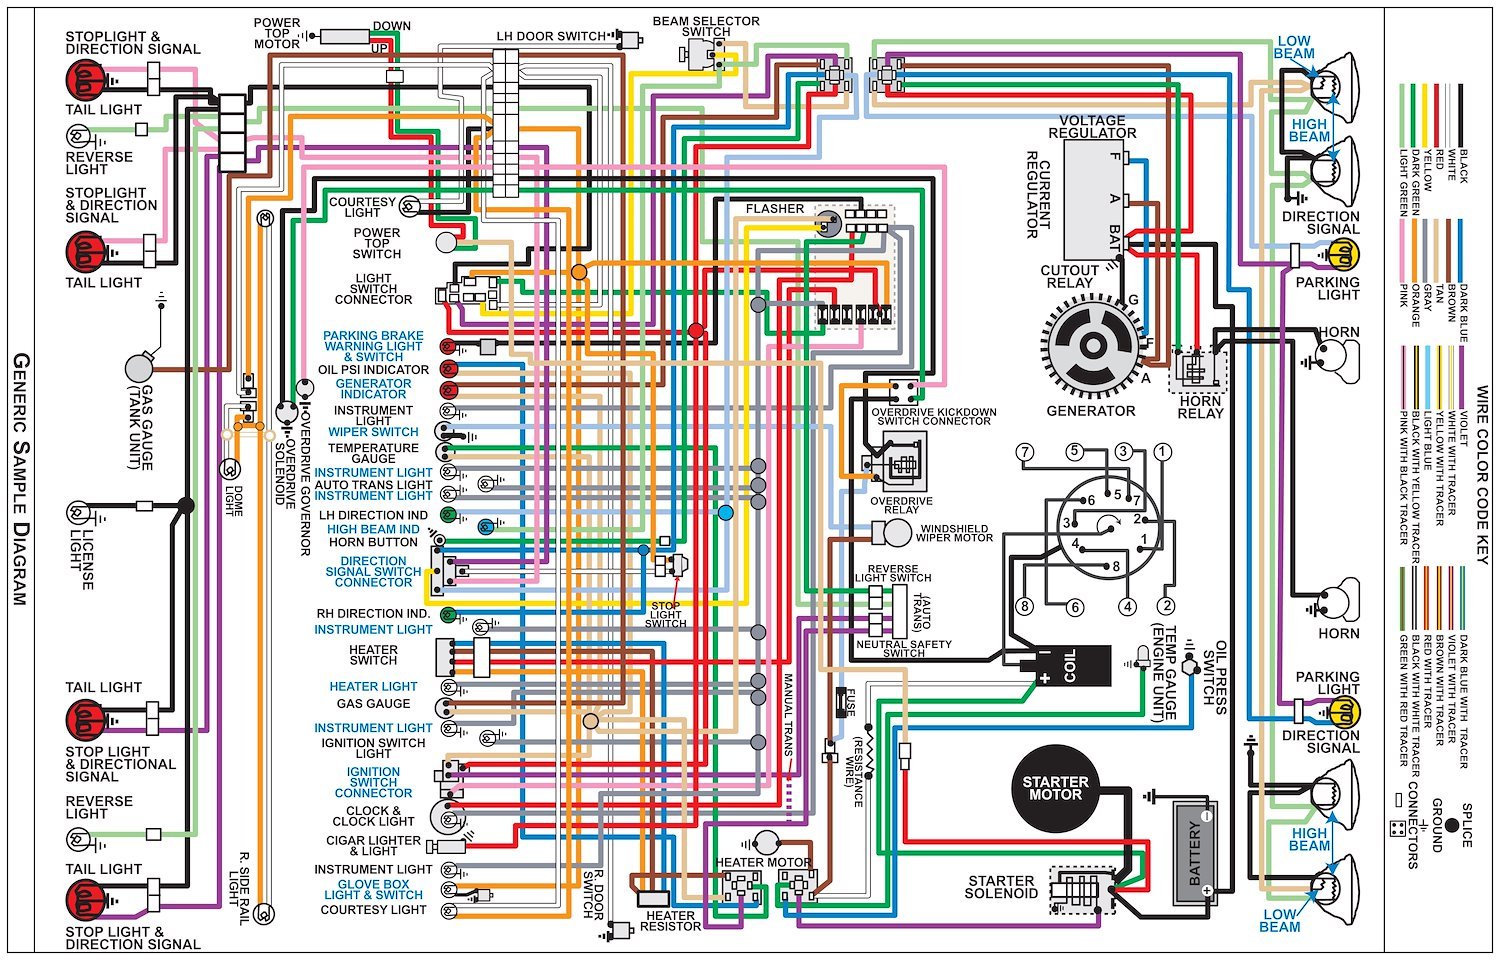 Wiring Diagram for 1963 Ford E-Series (Econoline), 11 in x 17 in., Laminated